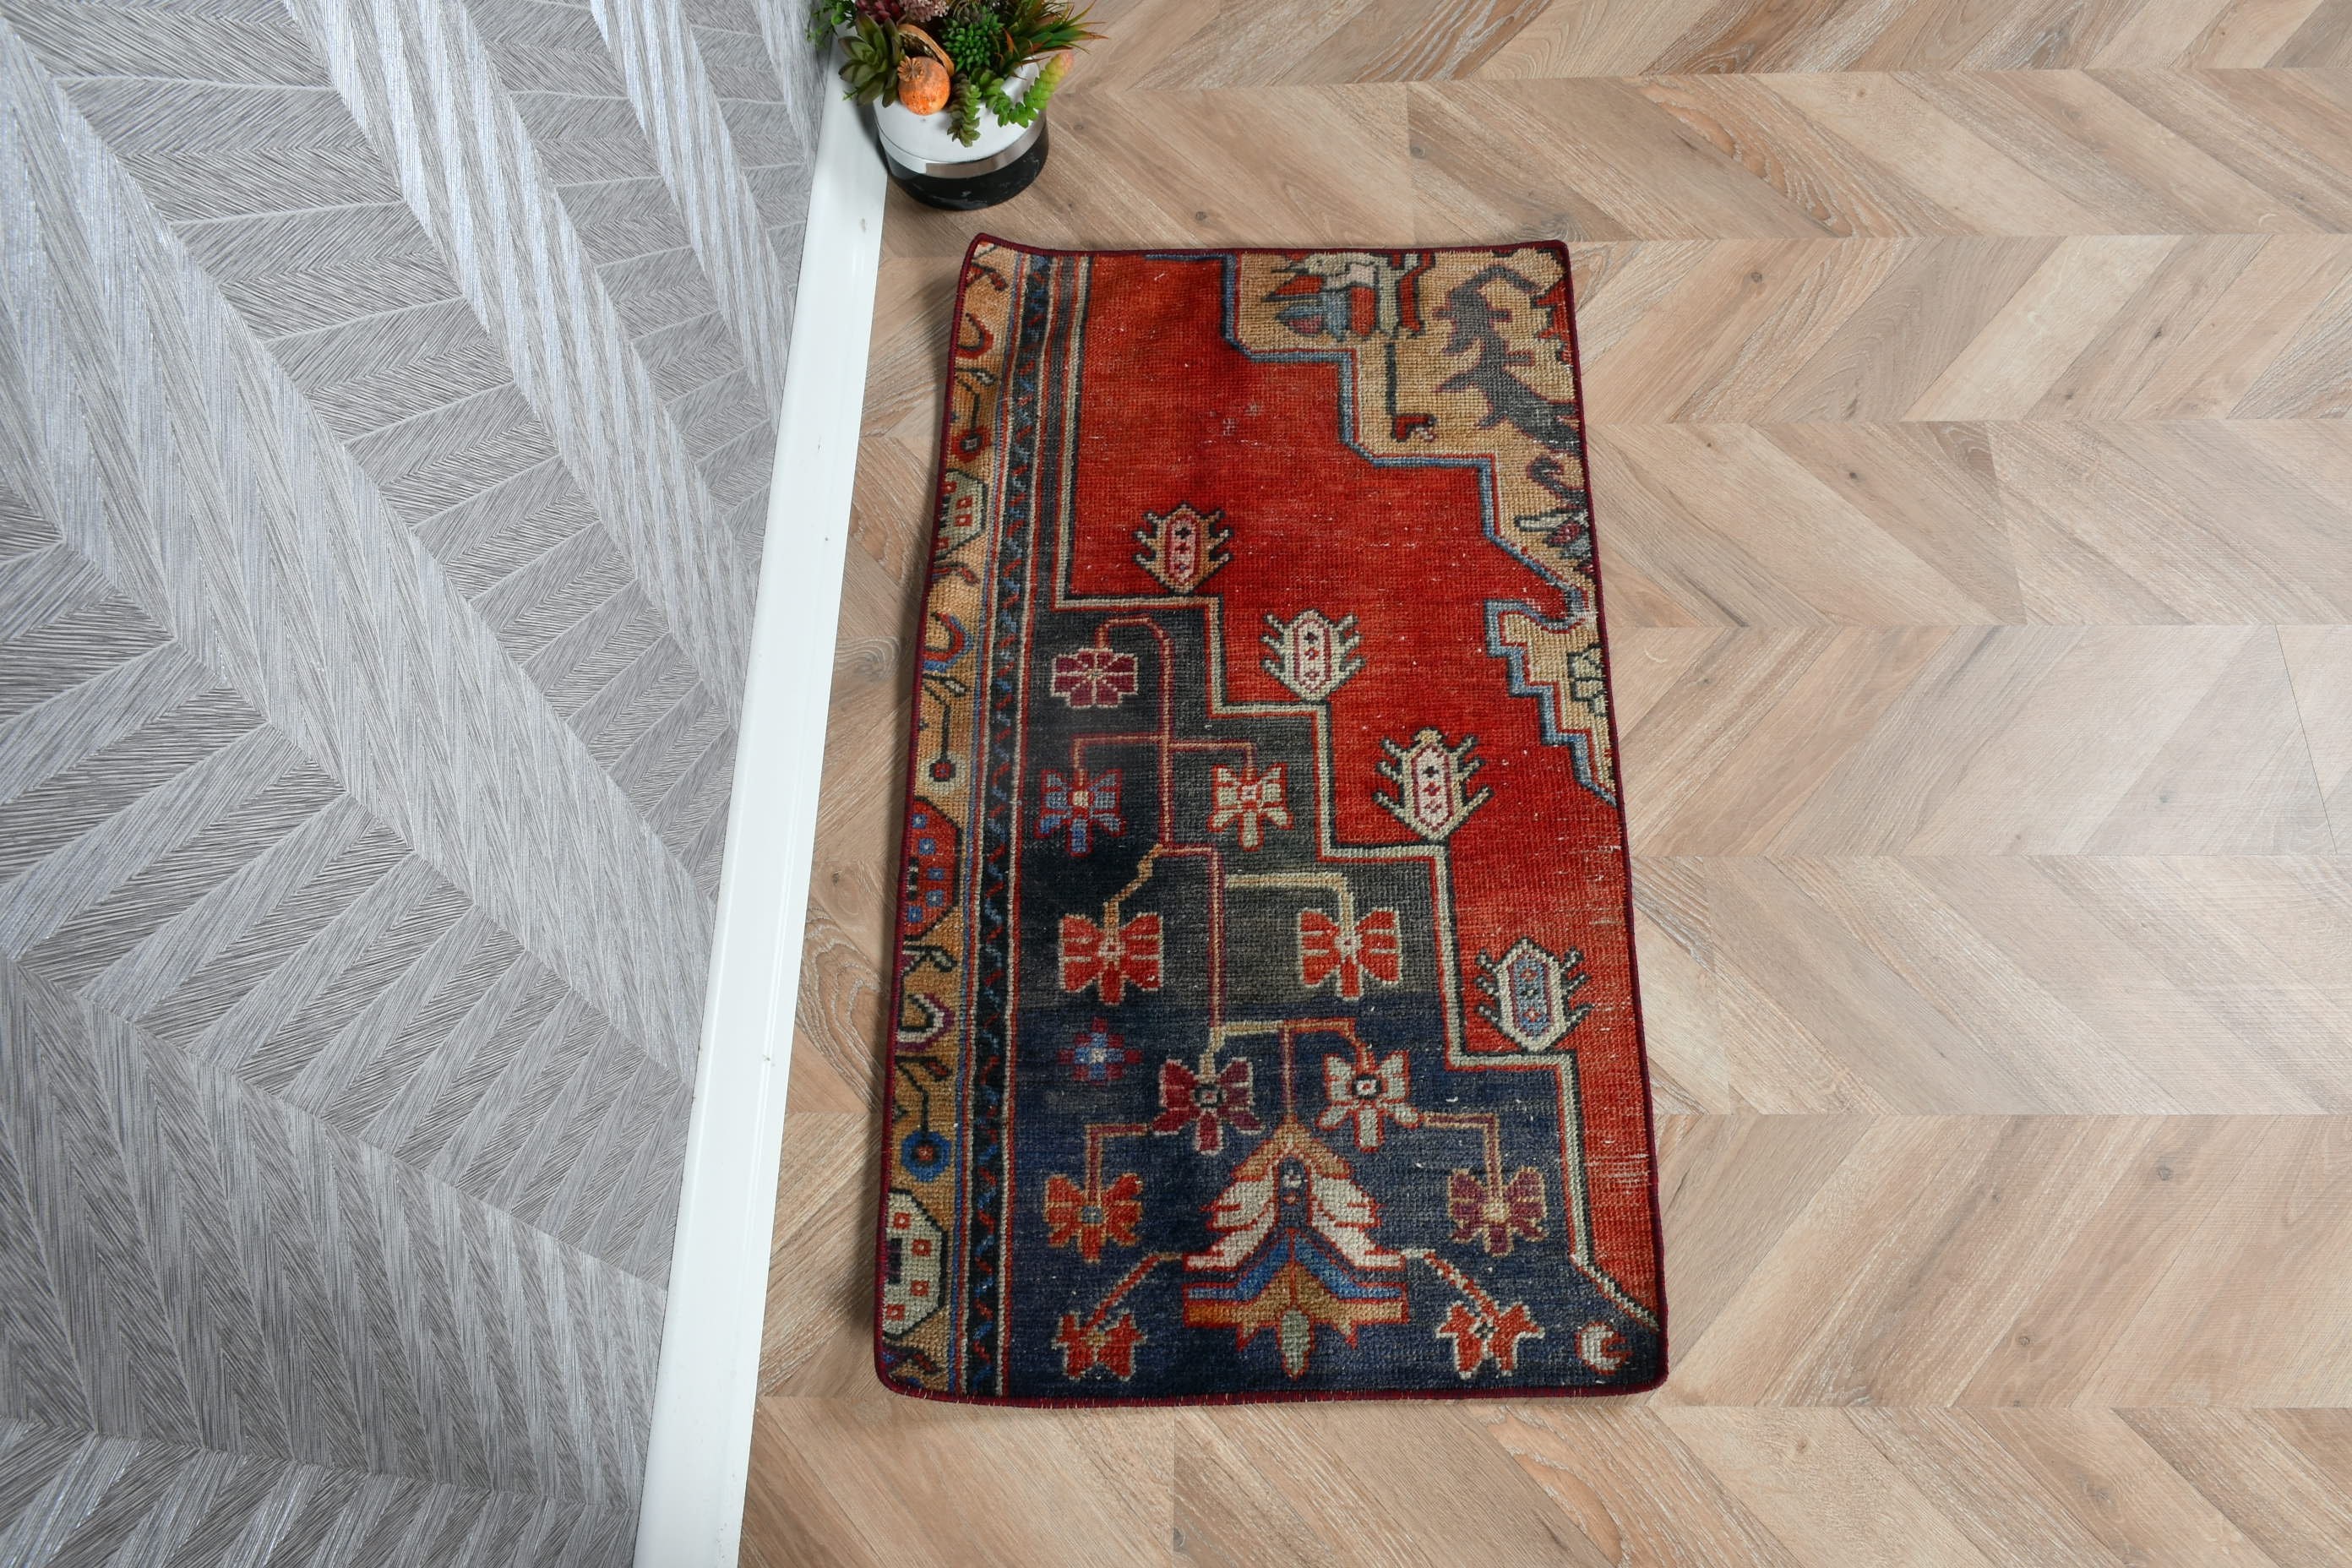 Bath Rugs, Distressed Rugs, Turkish Rug, Door Mat Rug, Moroccan Rugs, Home Decor Rug, 1.7x3.1 ft Small Rugs, Vintage Rug, Red Moroccan Rug